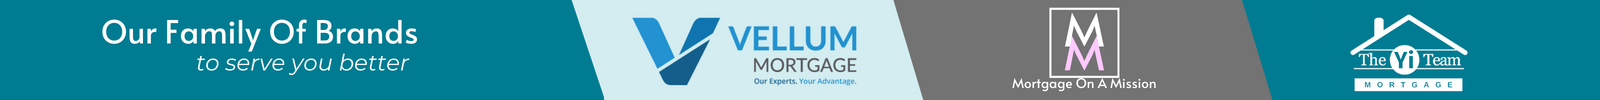 Our Family of Brands to serve you better:  Vellum Mortgage, Mortgage on a Missions, The Yi Team